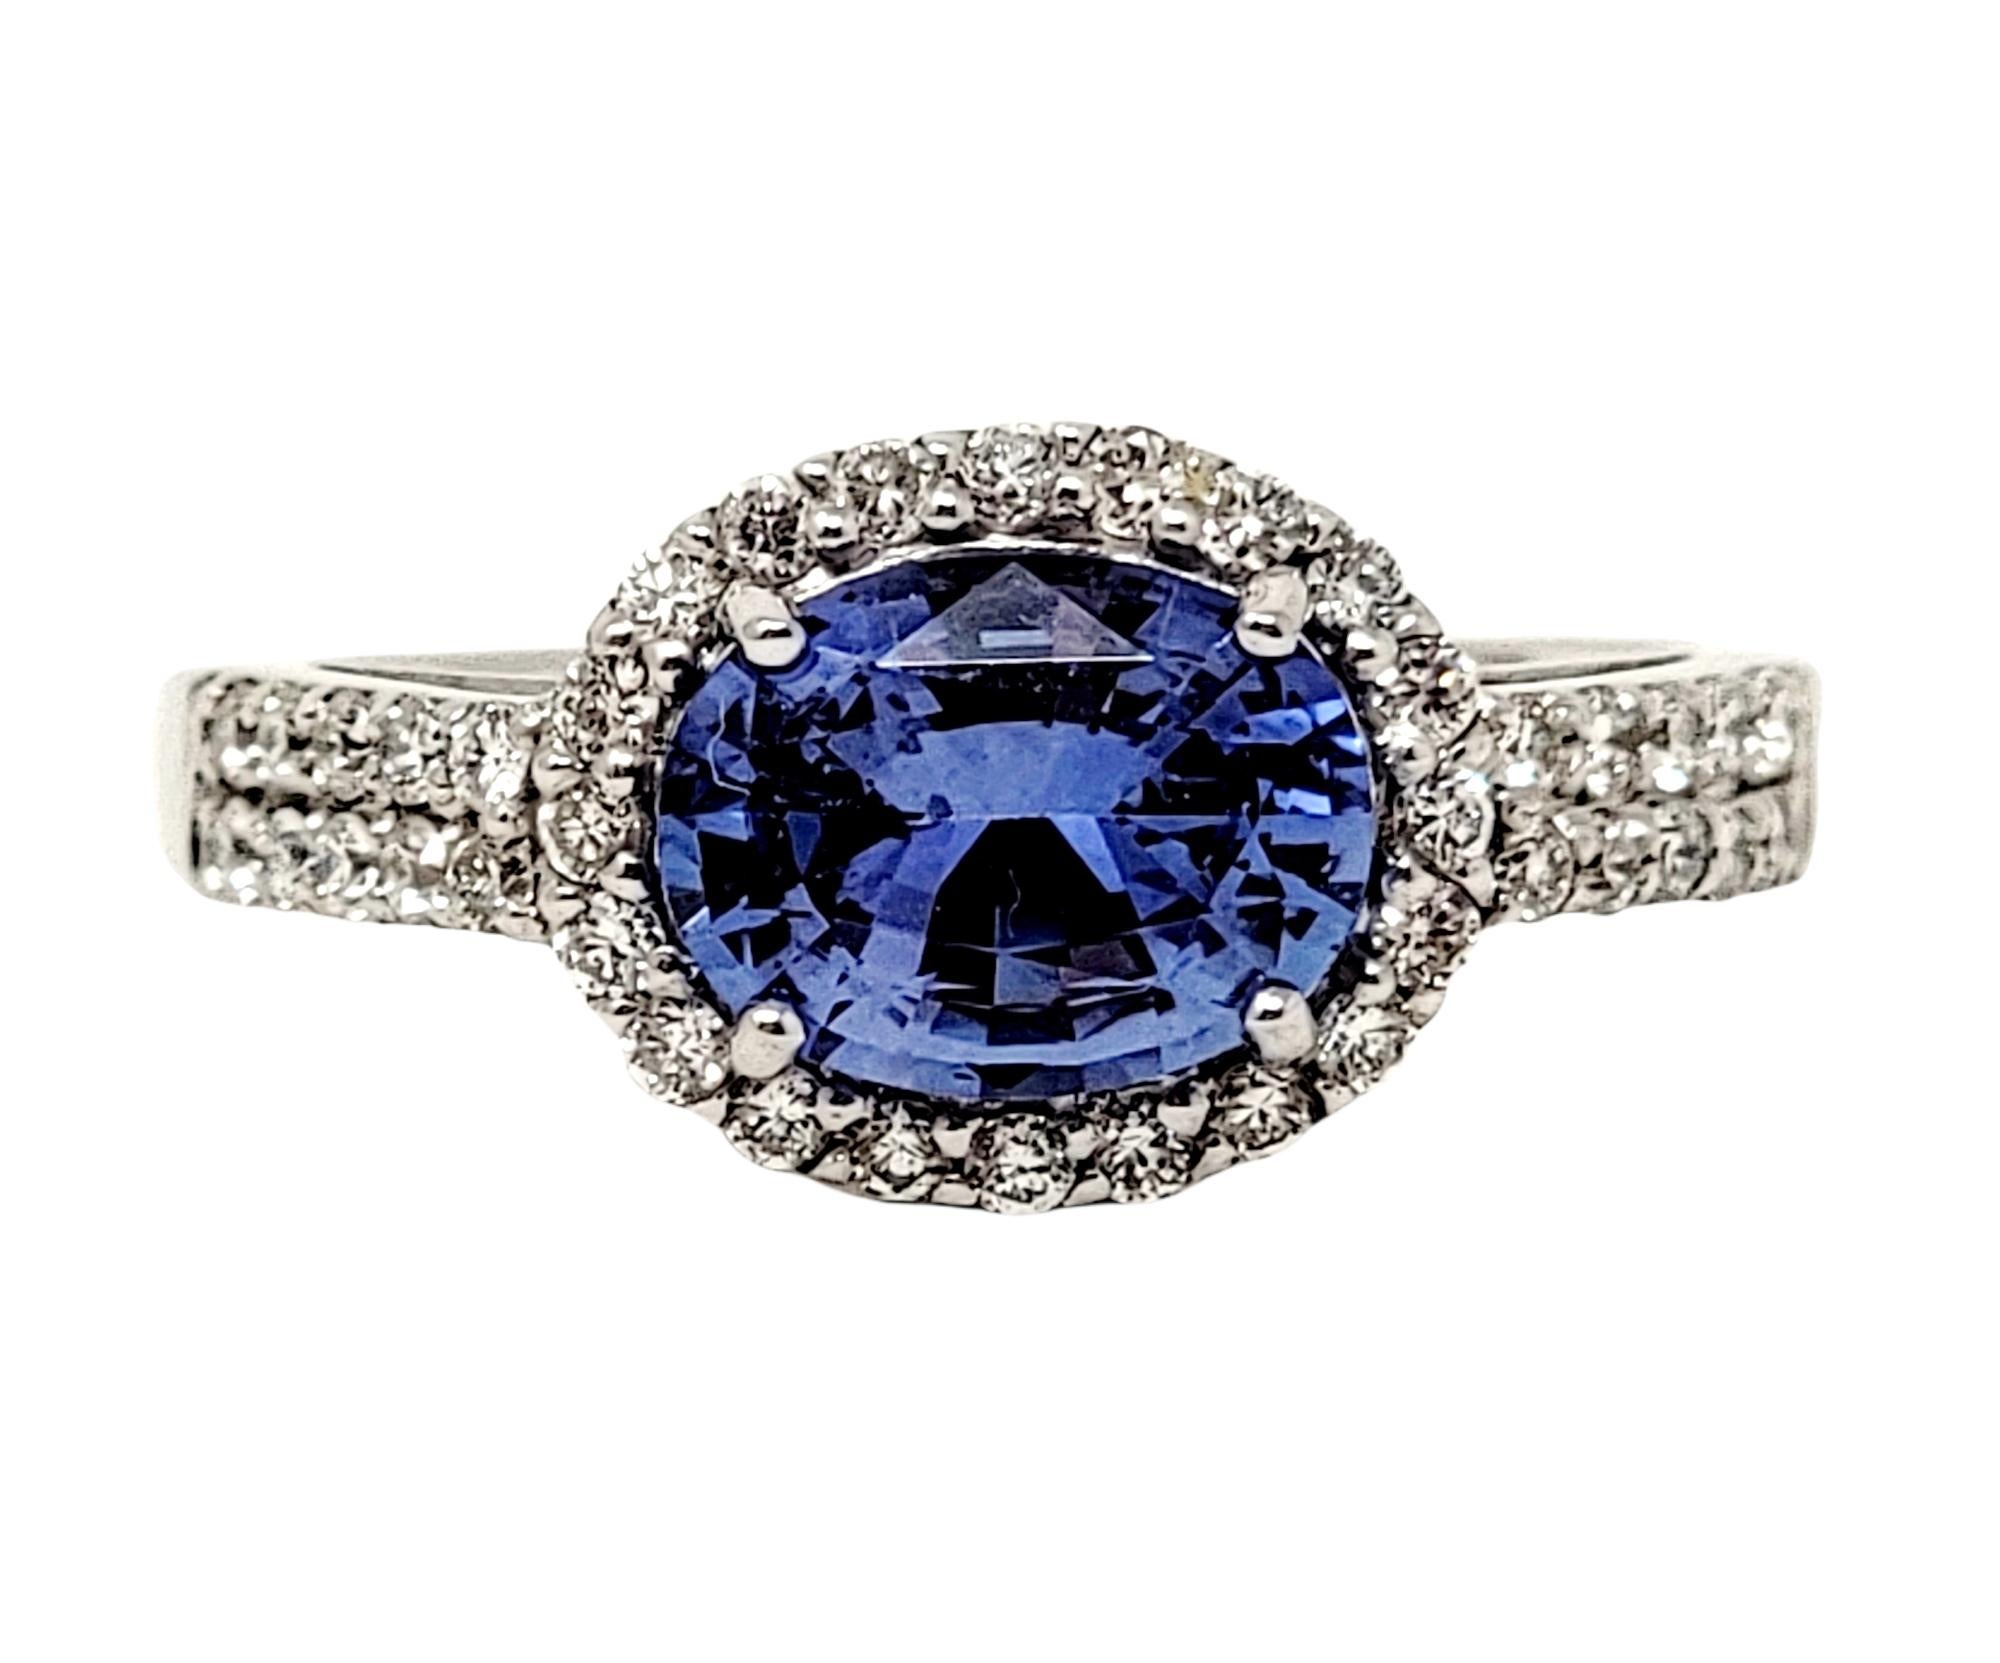 Ring size: 7

Absolutely gorgeous sapphire and diamond ring. Modern, elegant and romantic, this shimmering beauty absolutely wows. Featured at the center is an oval mixed cut natural ceylon sapphire prong set in white gold. The striking blue color